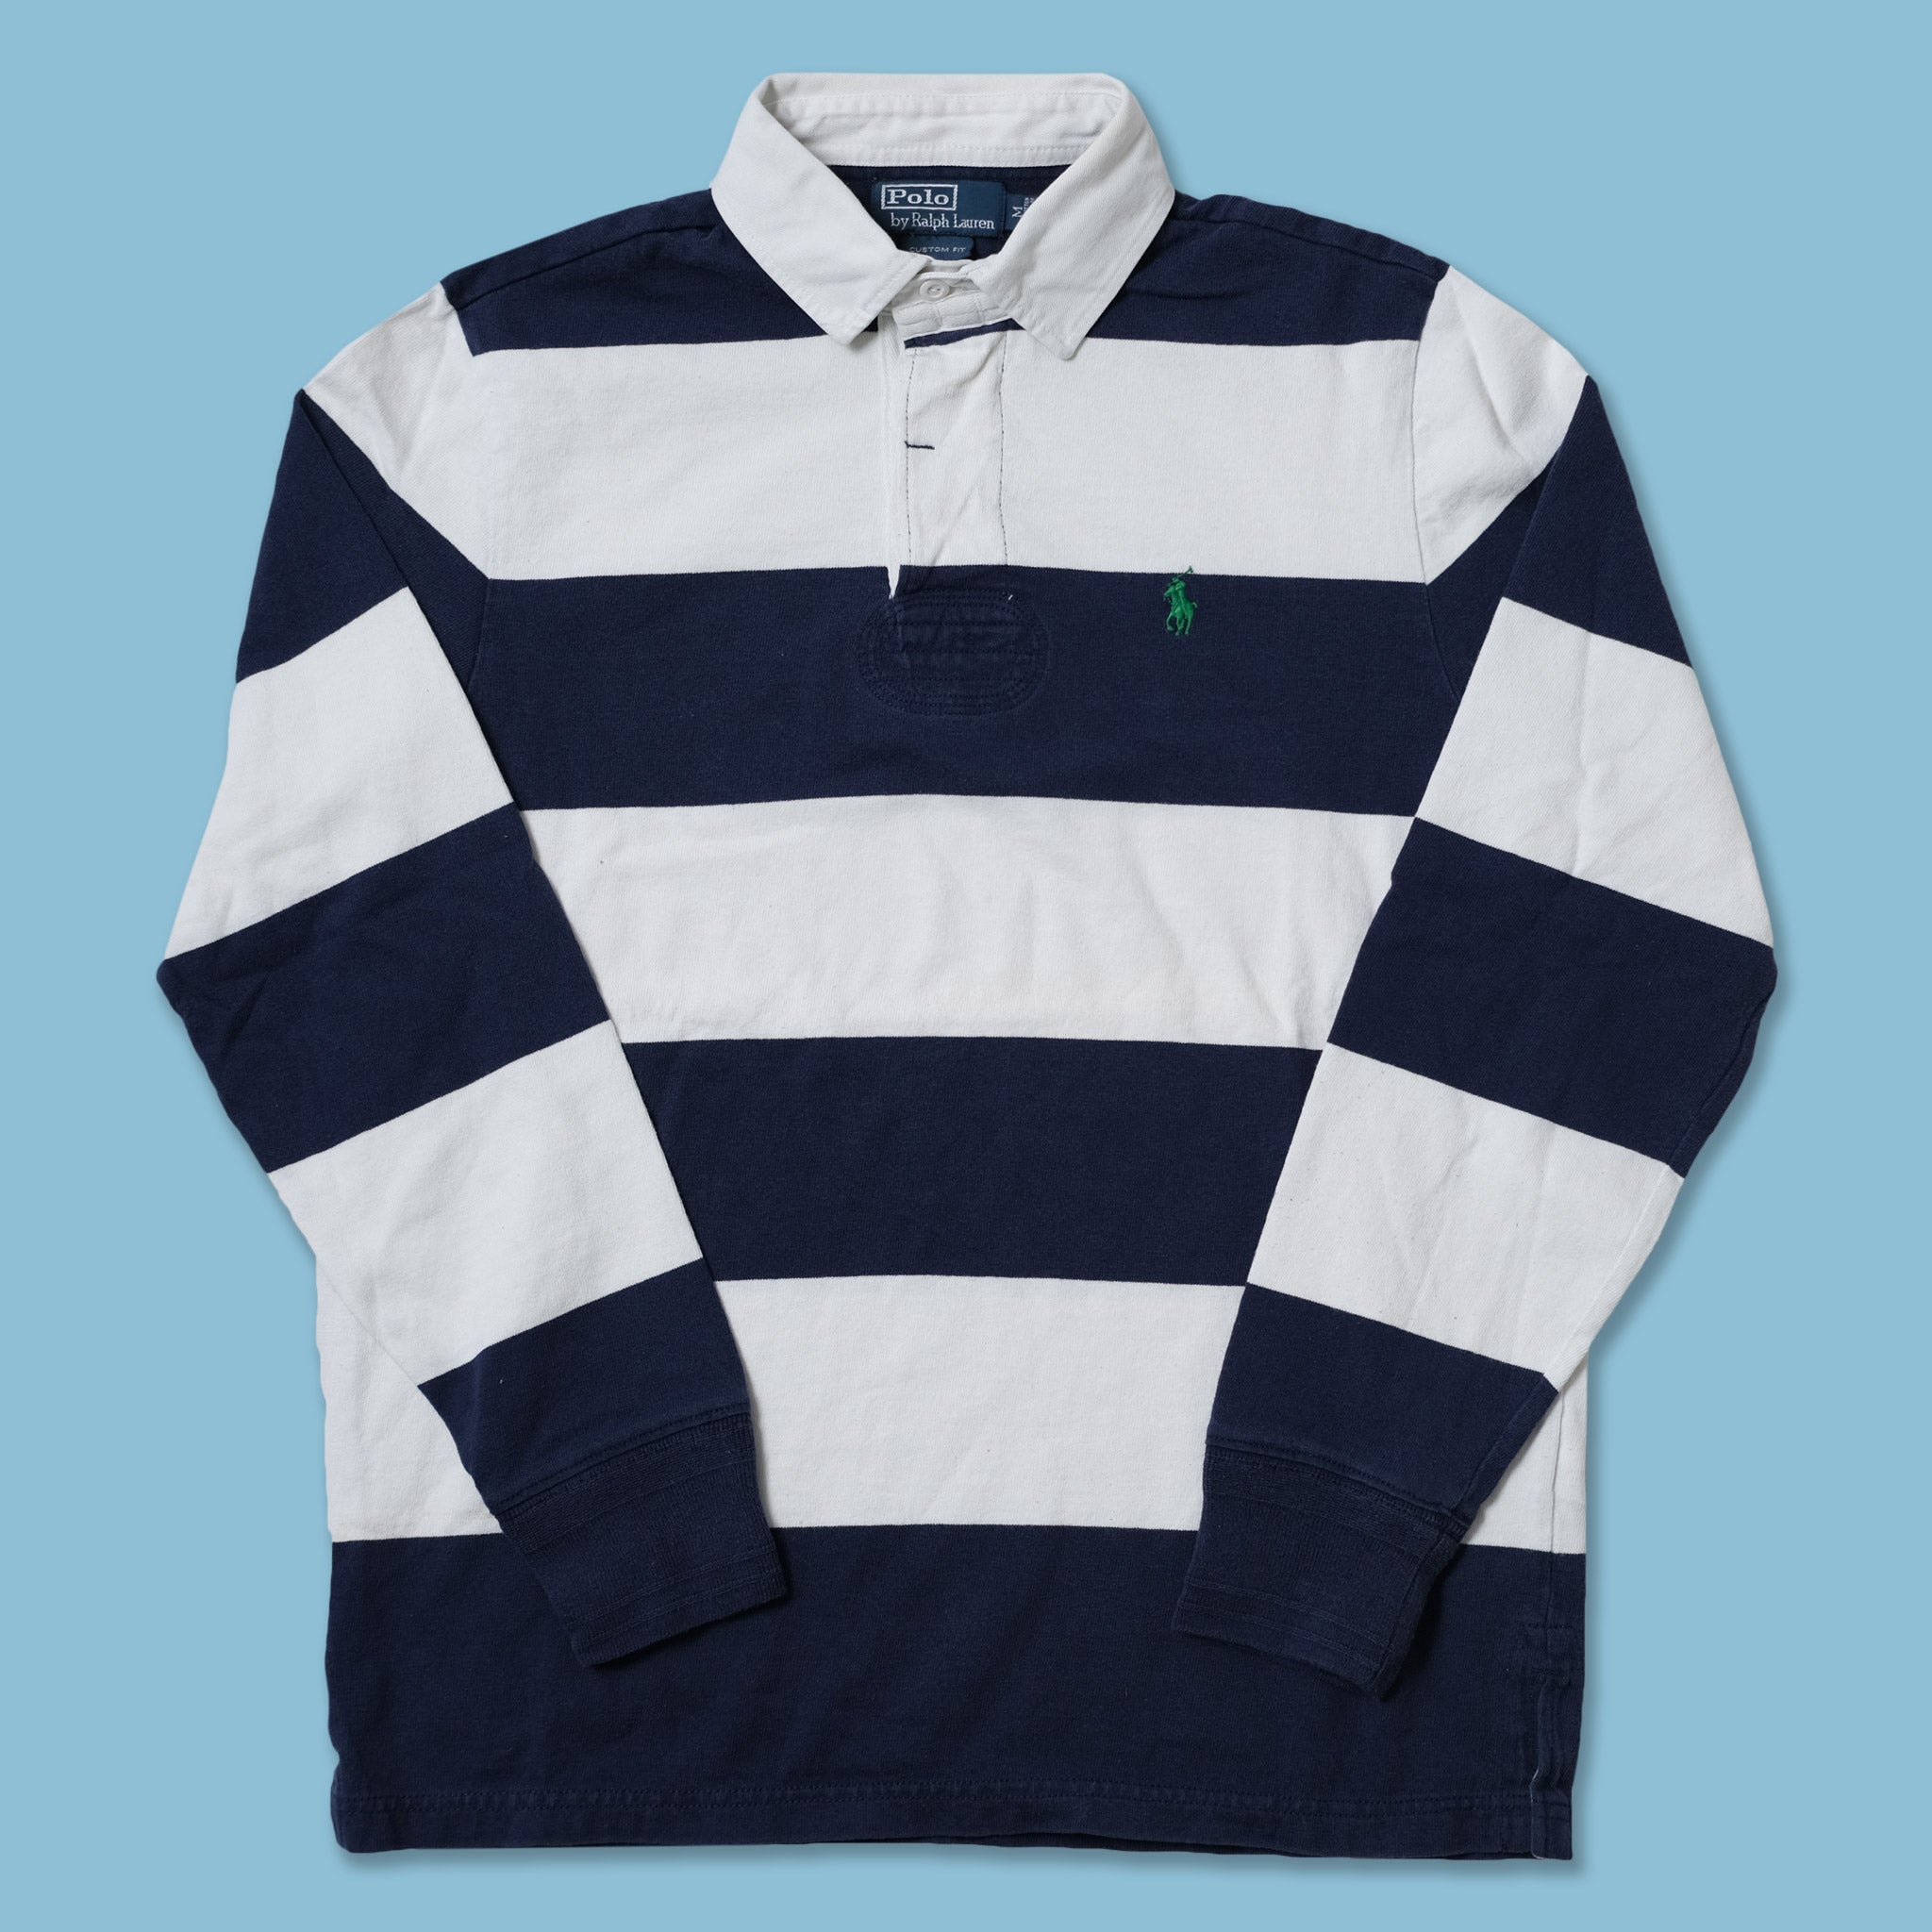 vintage polo rugby shirt